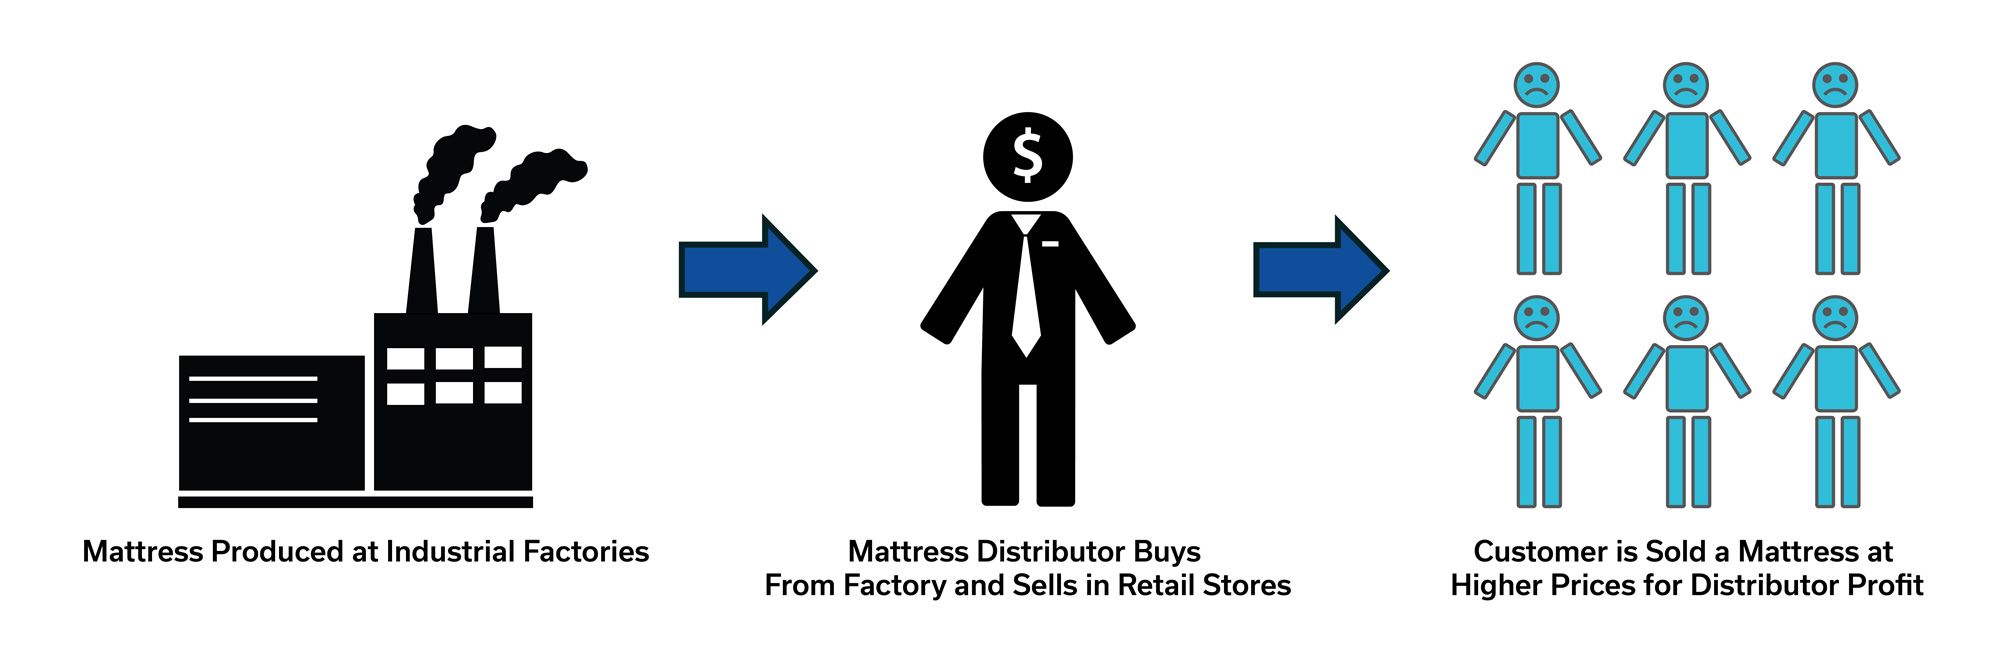 Other Mattress Companies Process: Step 1 Mattress Produced at Industrial Factories, Step 2 Mattress Distributor Buys From Factory and Sells in Retail Stores, Step 3 Customer is Sold a Mattress at Higher Prices for Distributor Profit